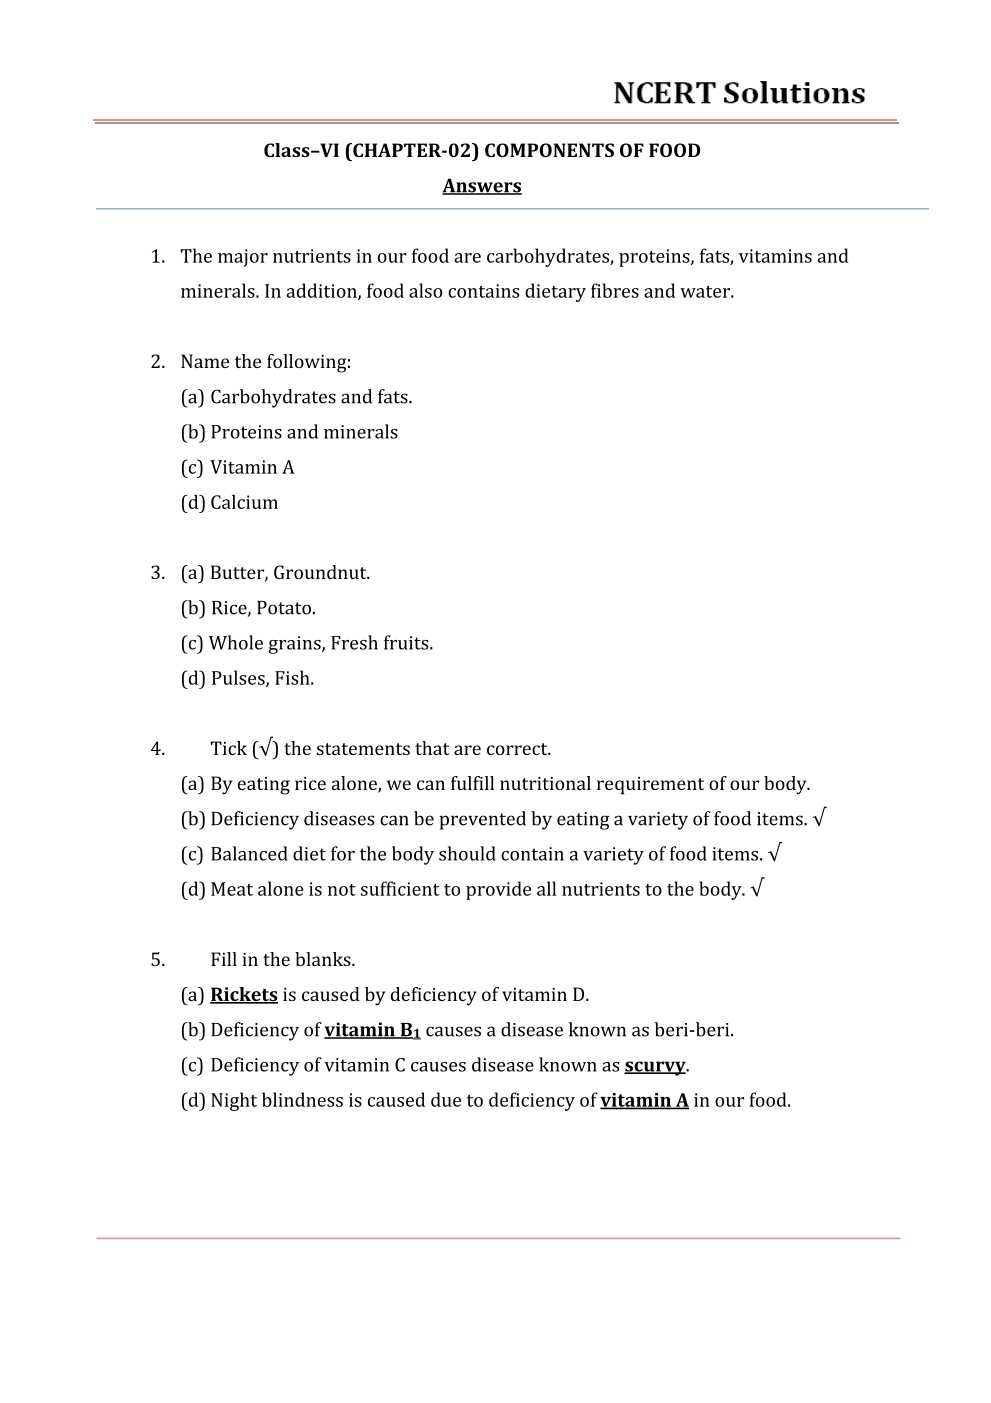 NCERT Solutions For Class 6 Science Chapter 2